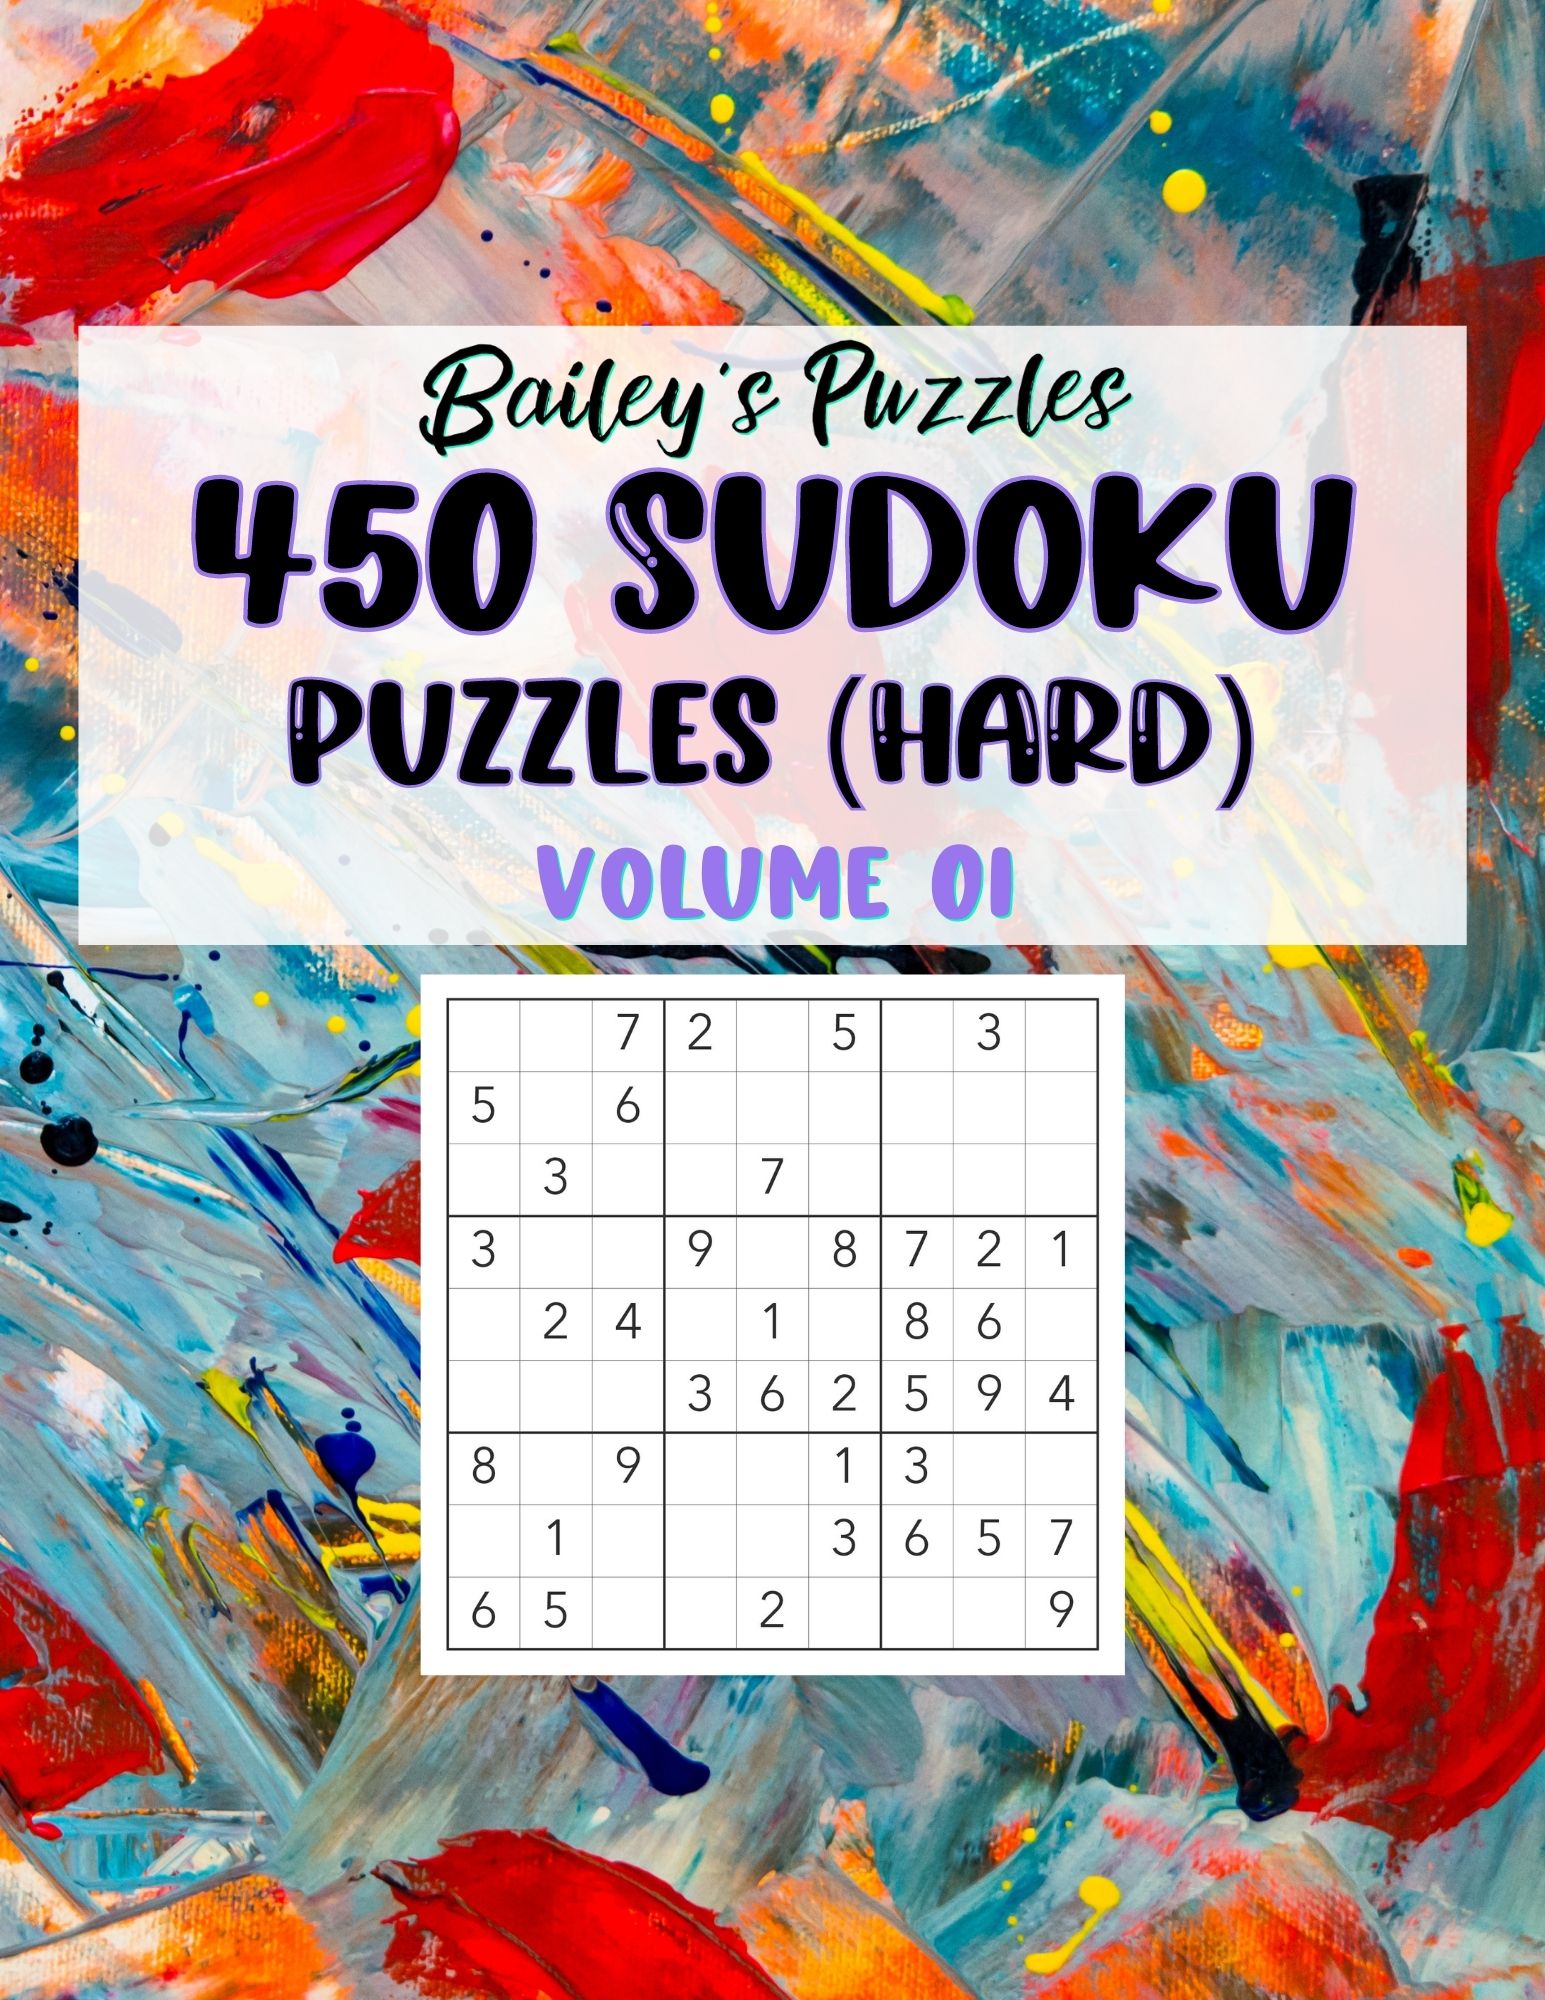 Front Cover - 450 Sudoku Puzzles (hard)